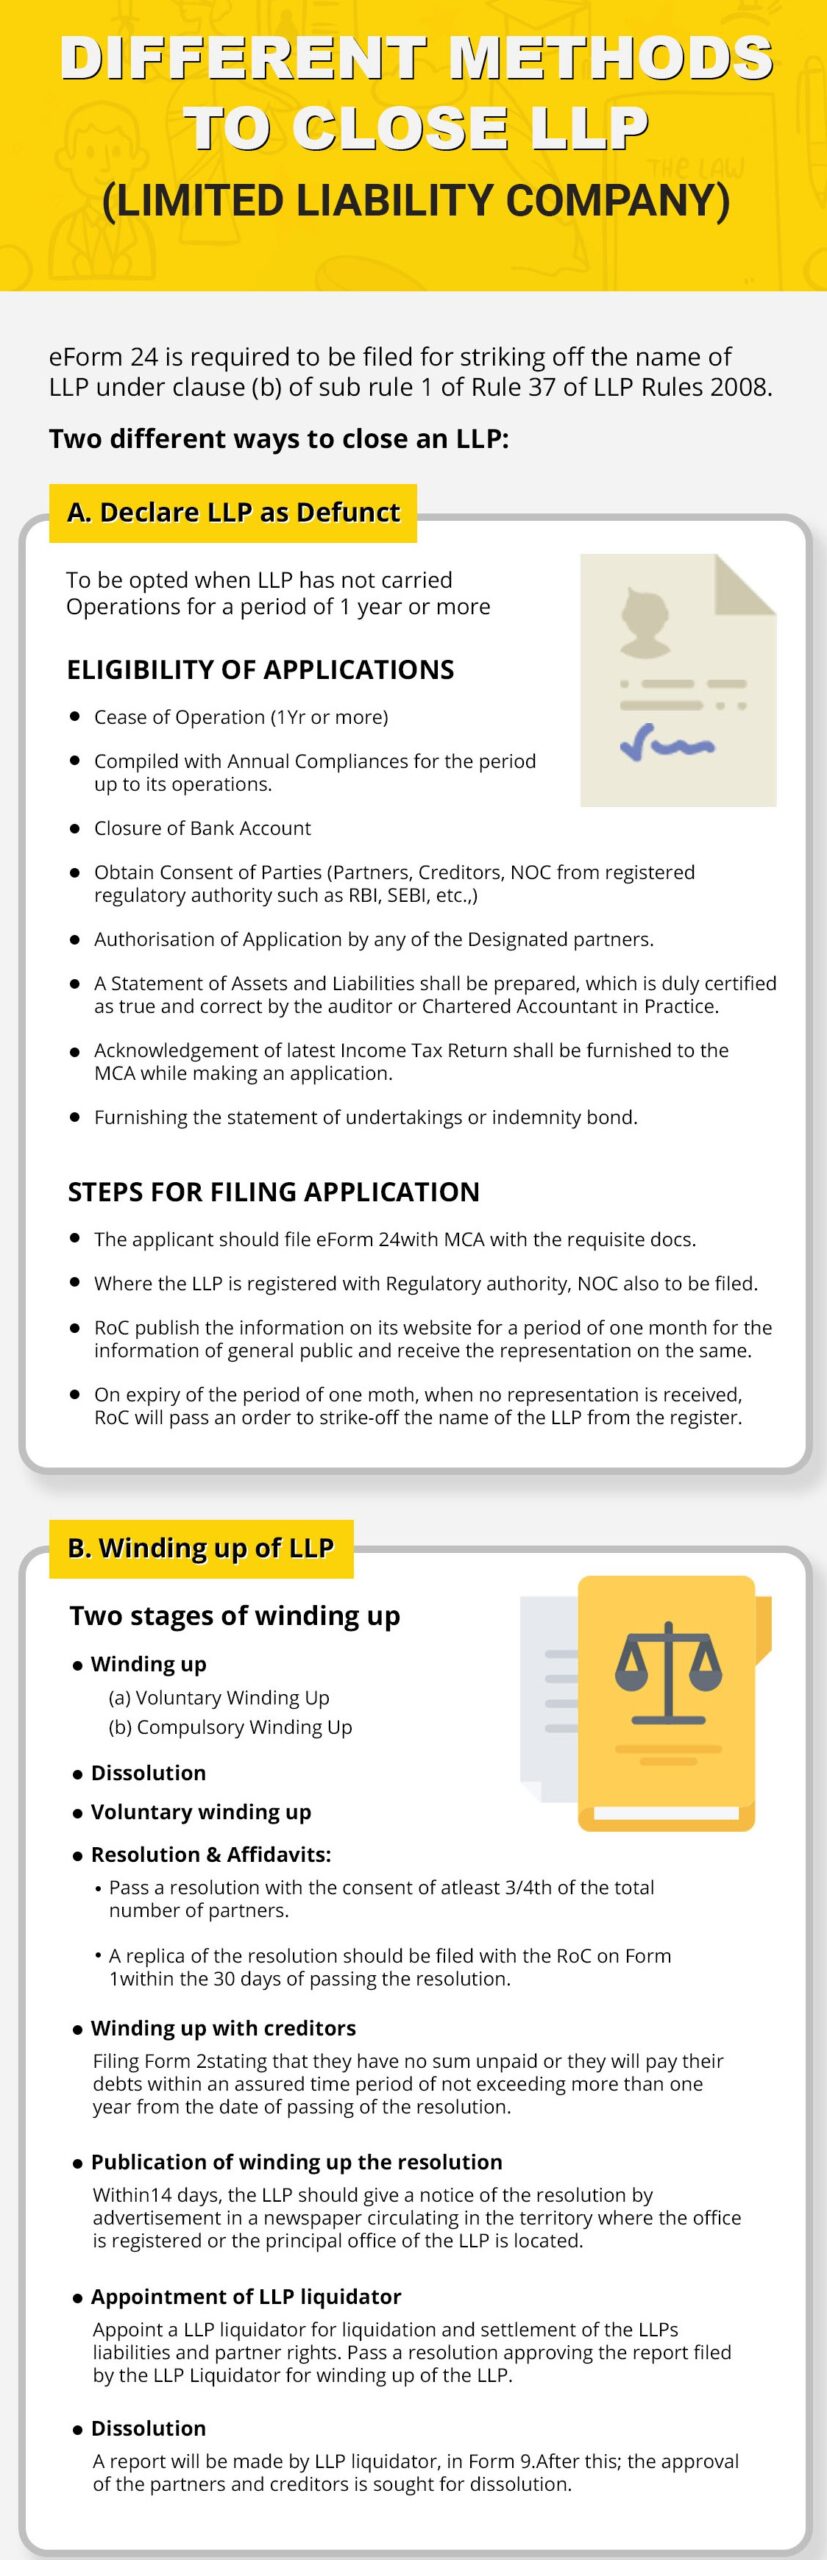 steps to Close an LLP in India.